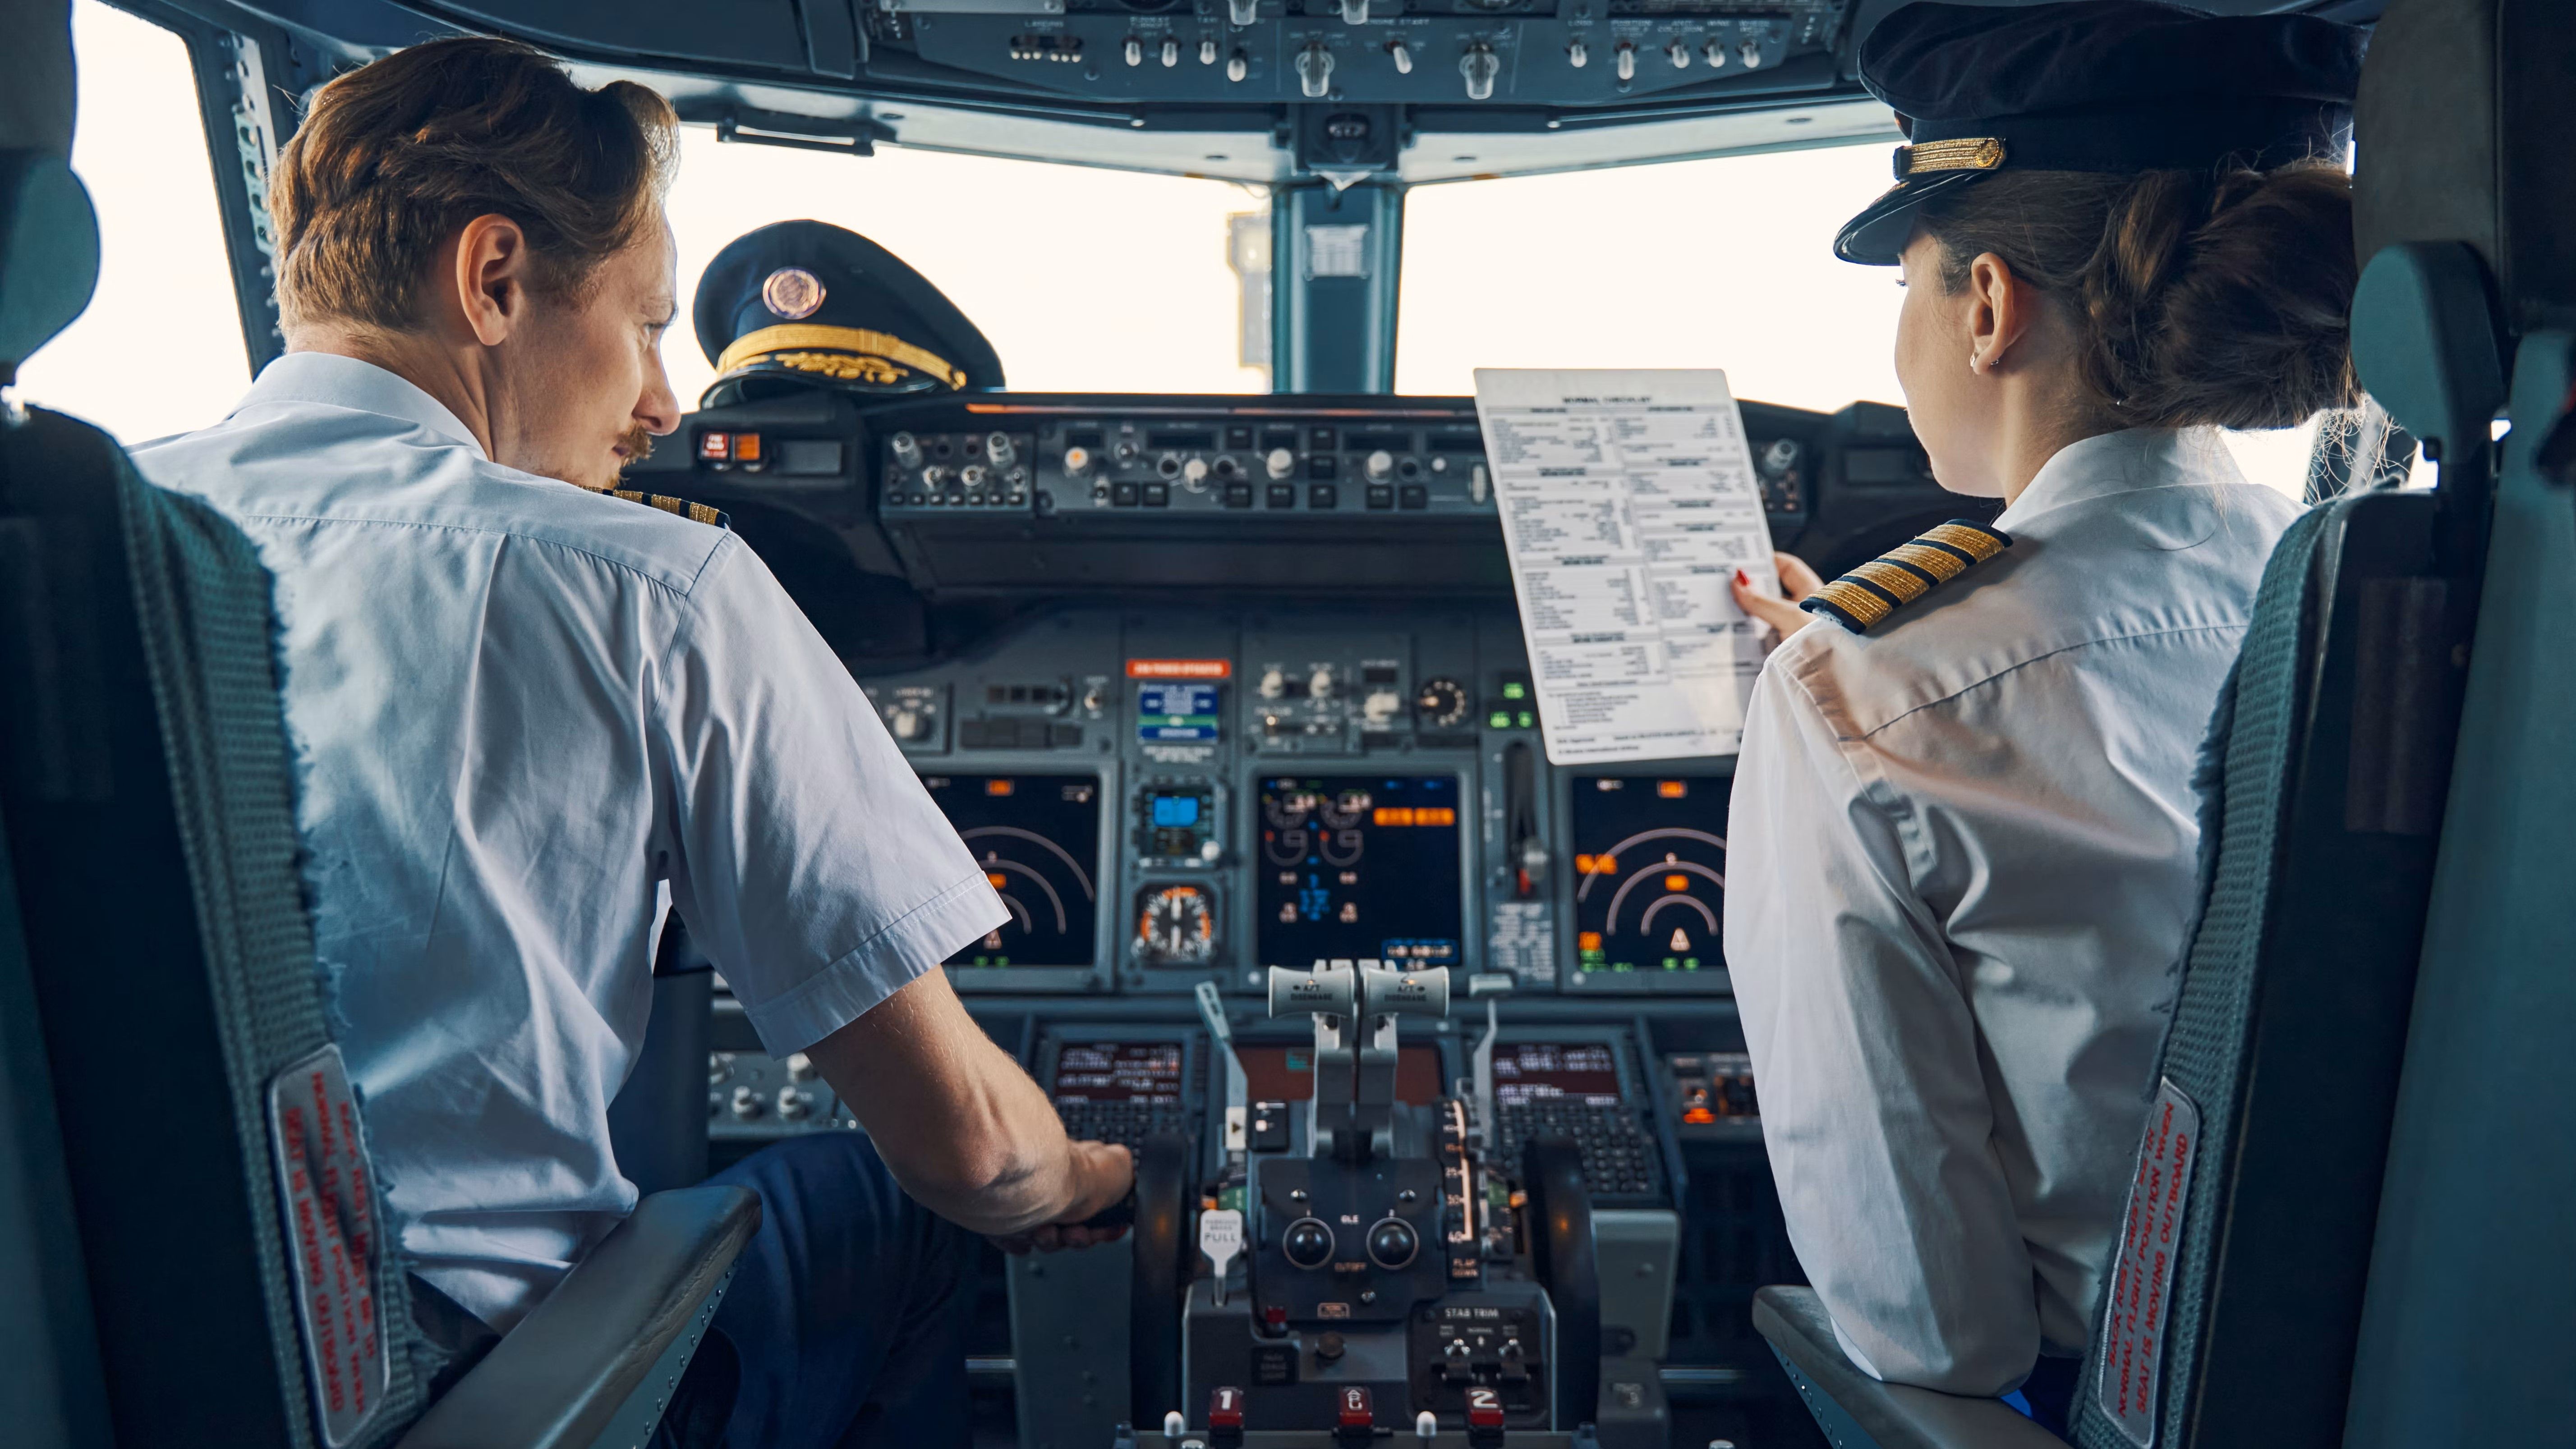 Two Pilots in the cockpit of a commercial airliner.